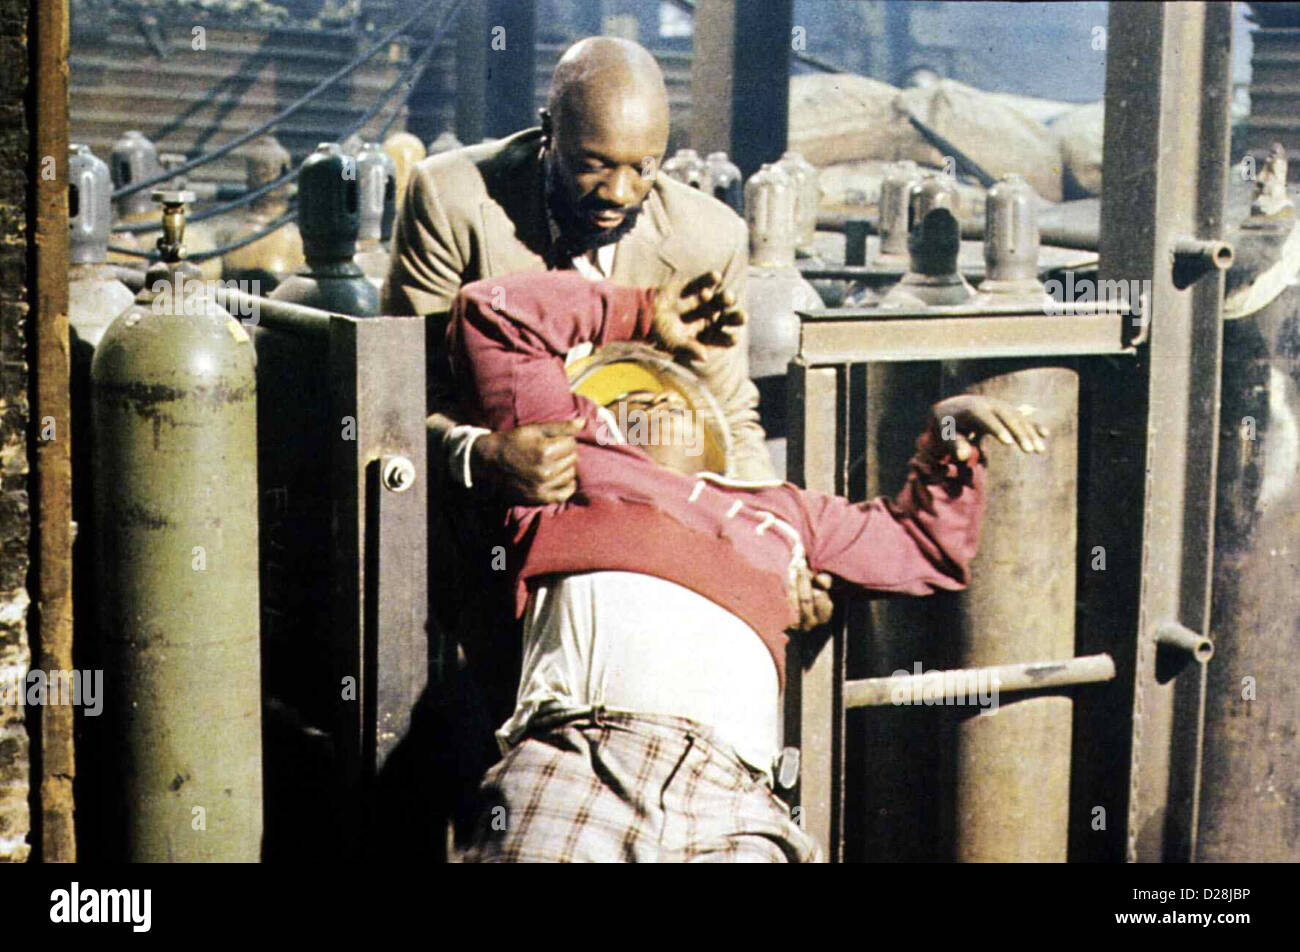 Zwei Faeuste Des Himmels   Uomini Duri   Lee Stevens (Isaac Hayes,h) *** Local Caption *** 1973  -- Stock Photo